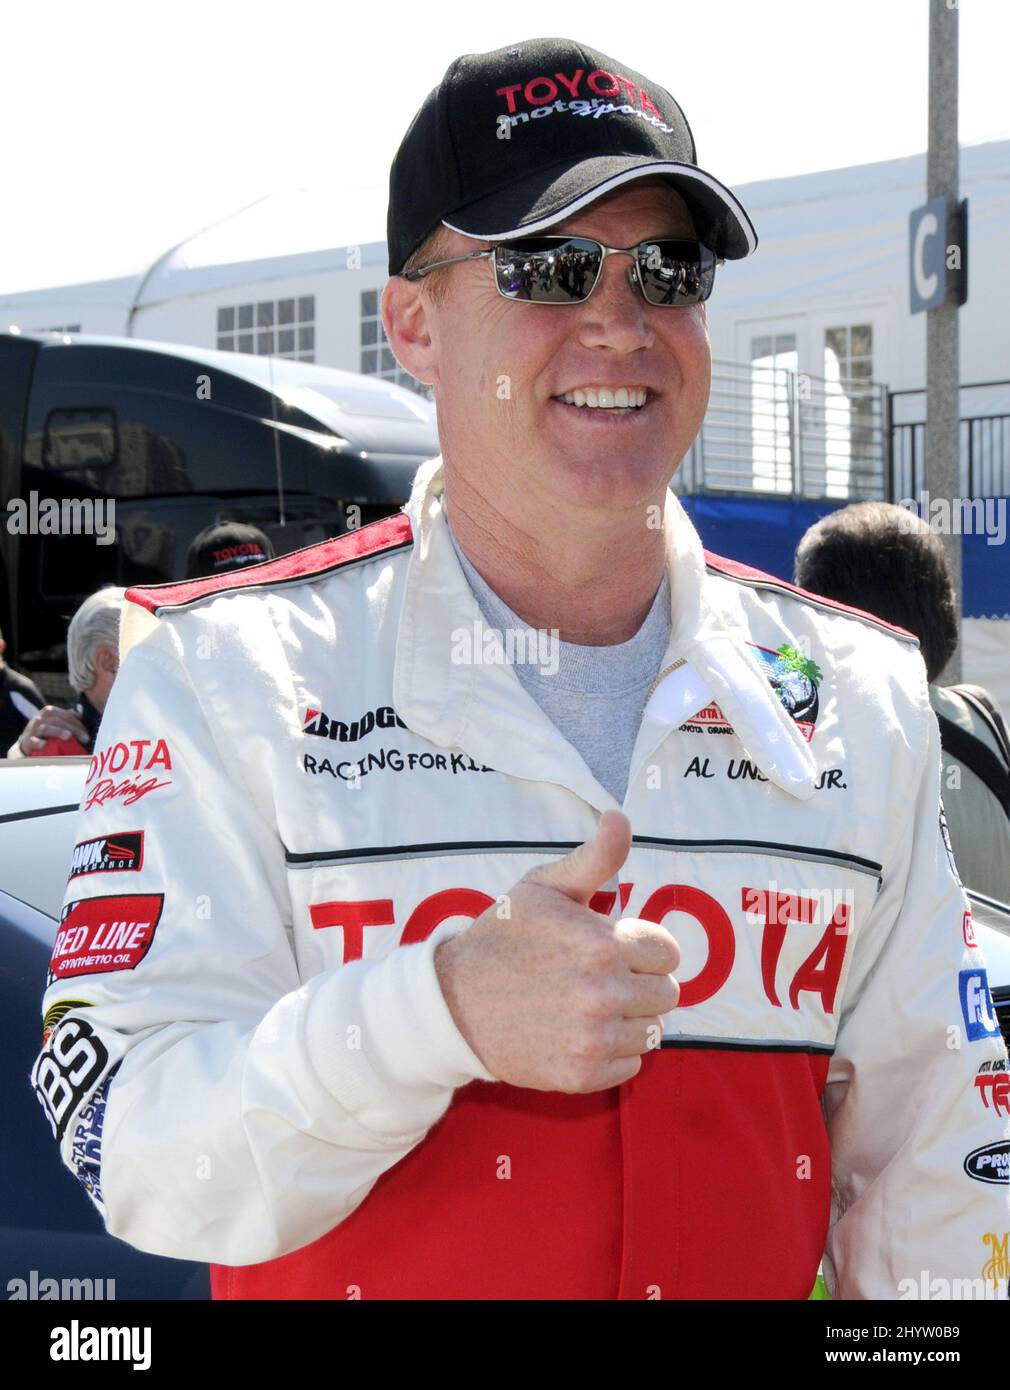 Al Unser Jr. at the 33rd Annual Toyota Pro/Celebrity Race practice day, held on the streets of Long Beach, California Stock Photo